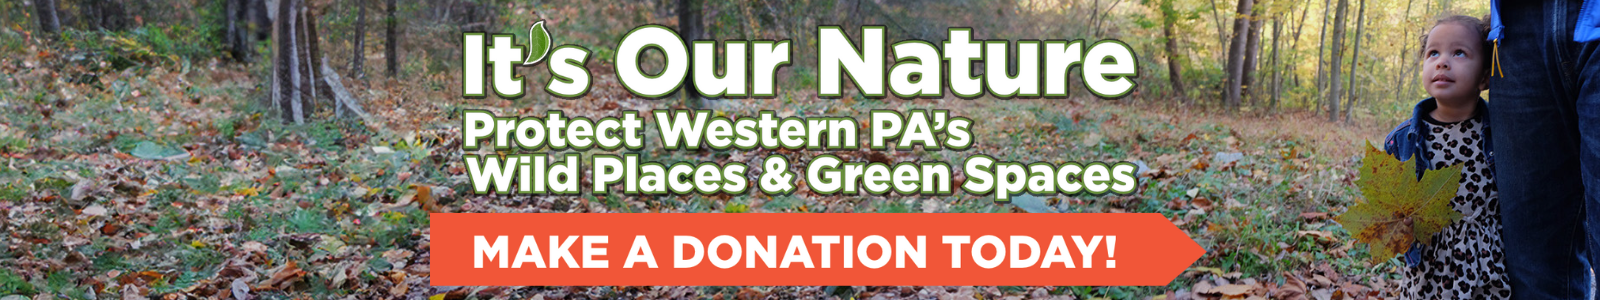 A young girl clings to her parent with one hand while holding a large sycamore leaf in the other. They stand to the right side of a fall forest landscape. The words "It's Our Nature: Protect Western PA's Wild Places & Green Spaces" is overlayed on the image with a oragnge button that says "Make a Donation Today!"